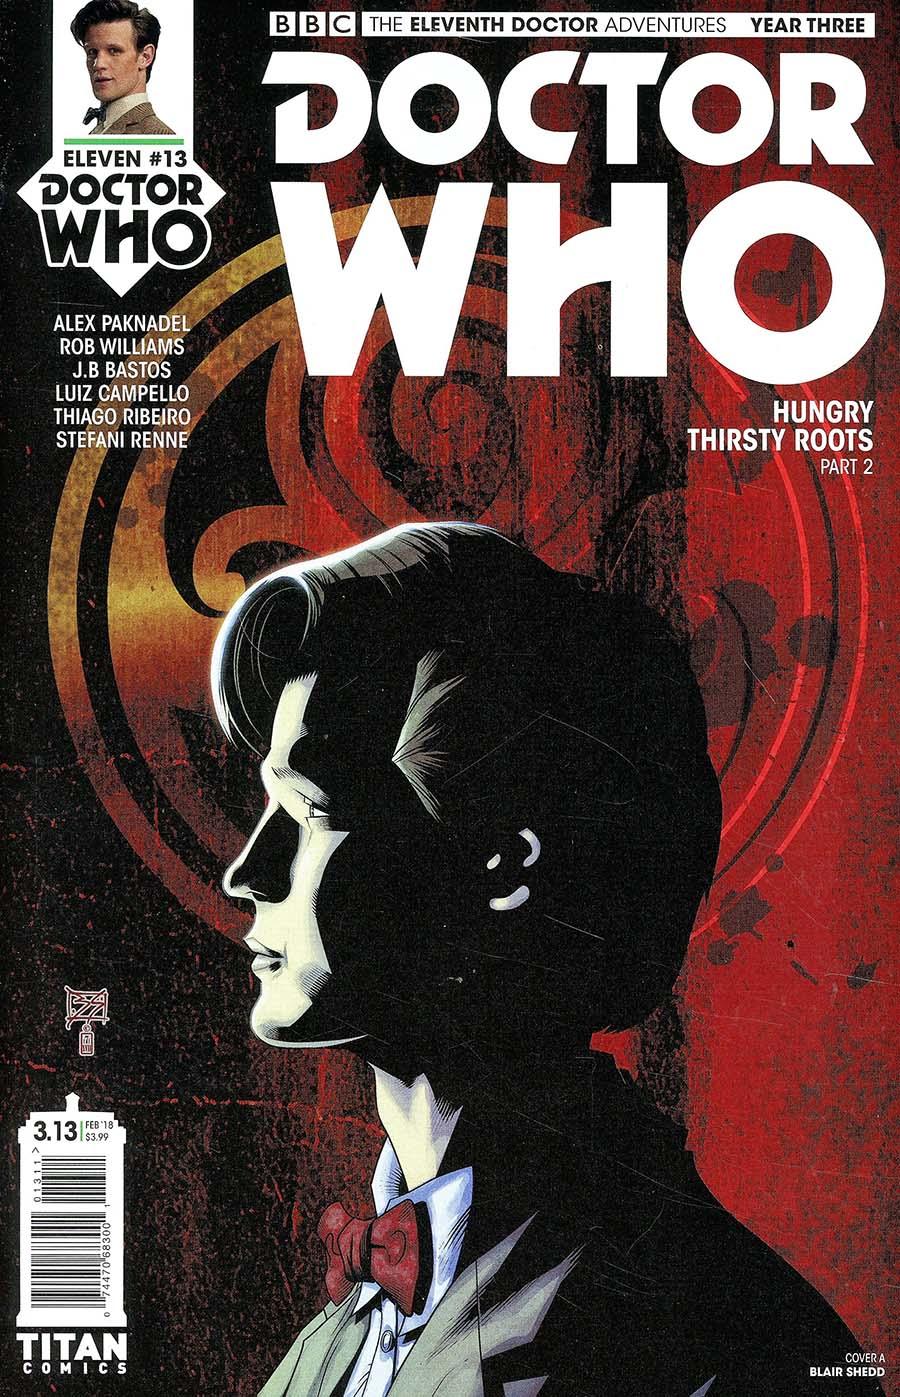 Doctor Who 11th Doctor Year Three Vol. 1 #13